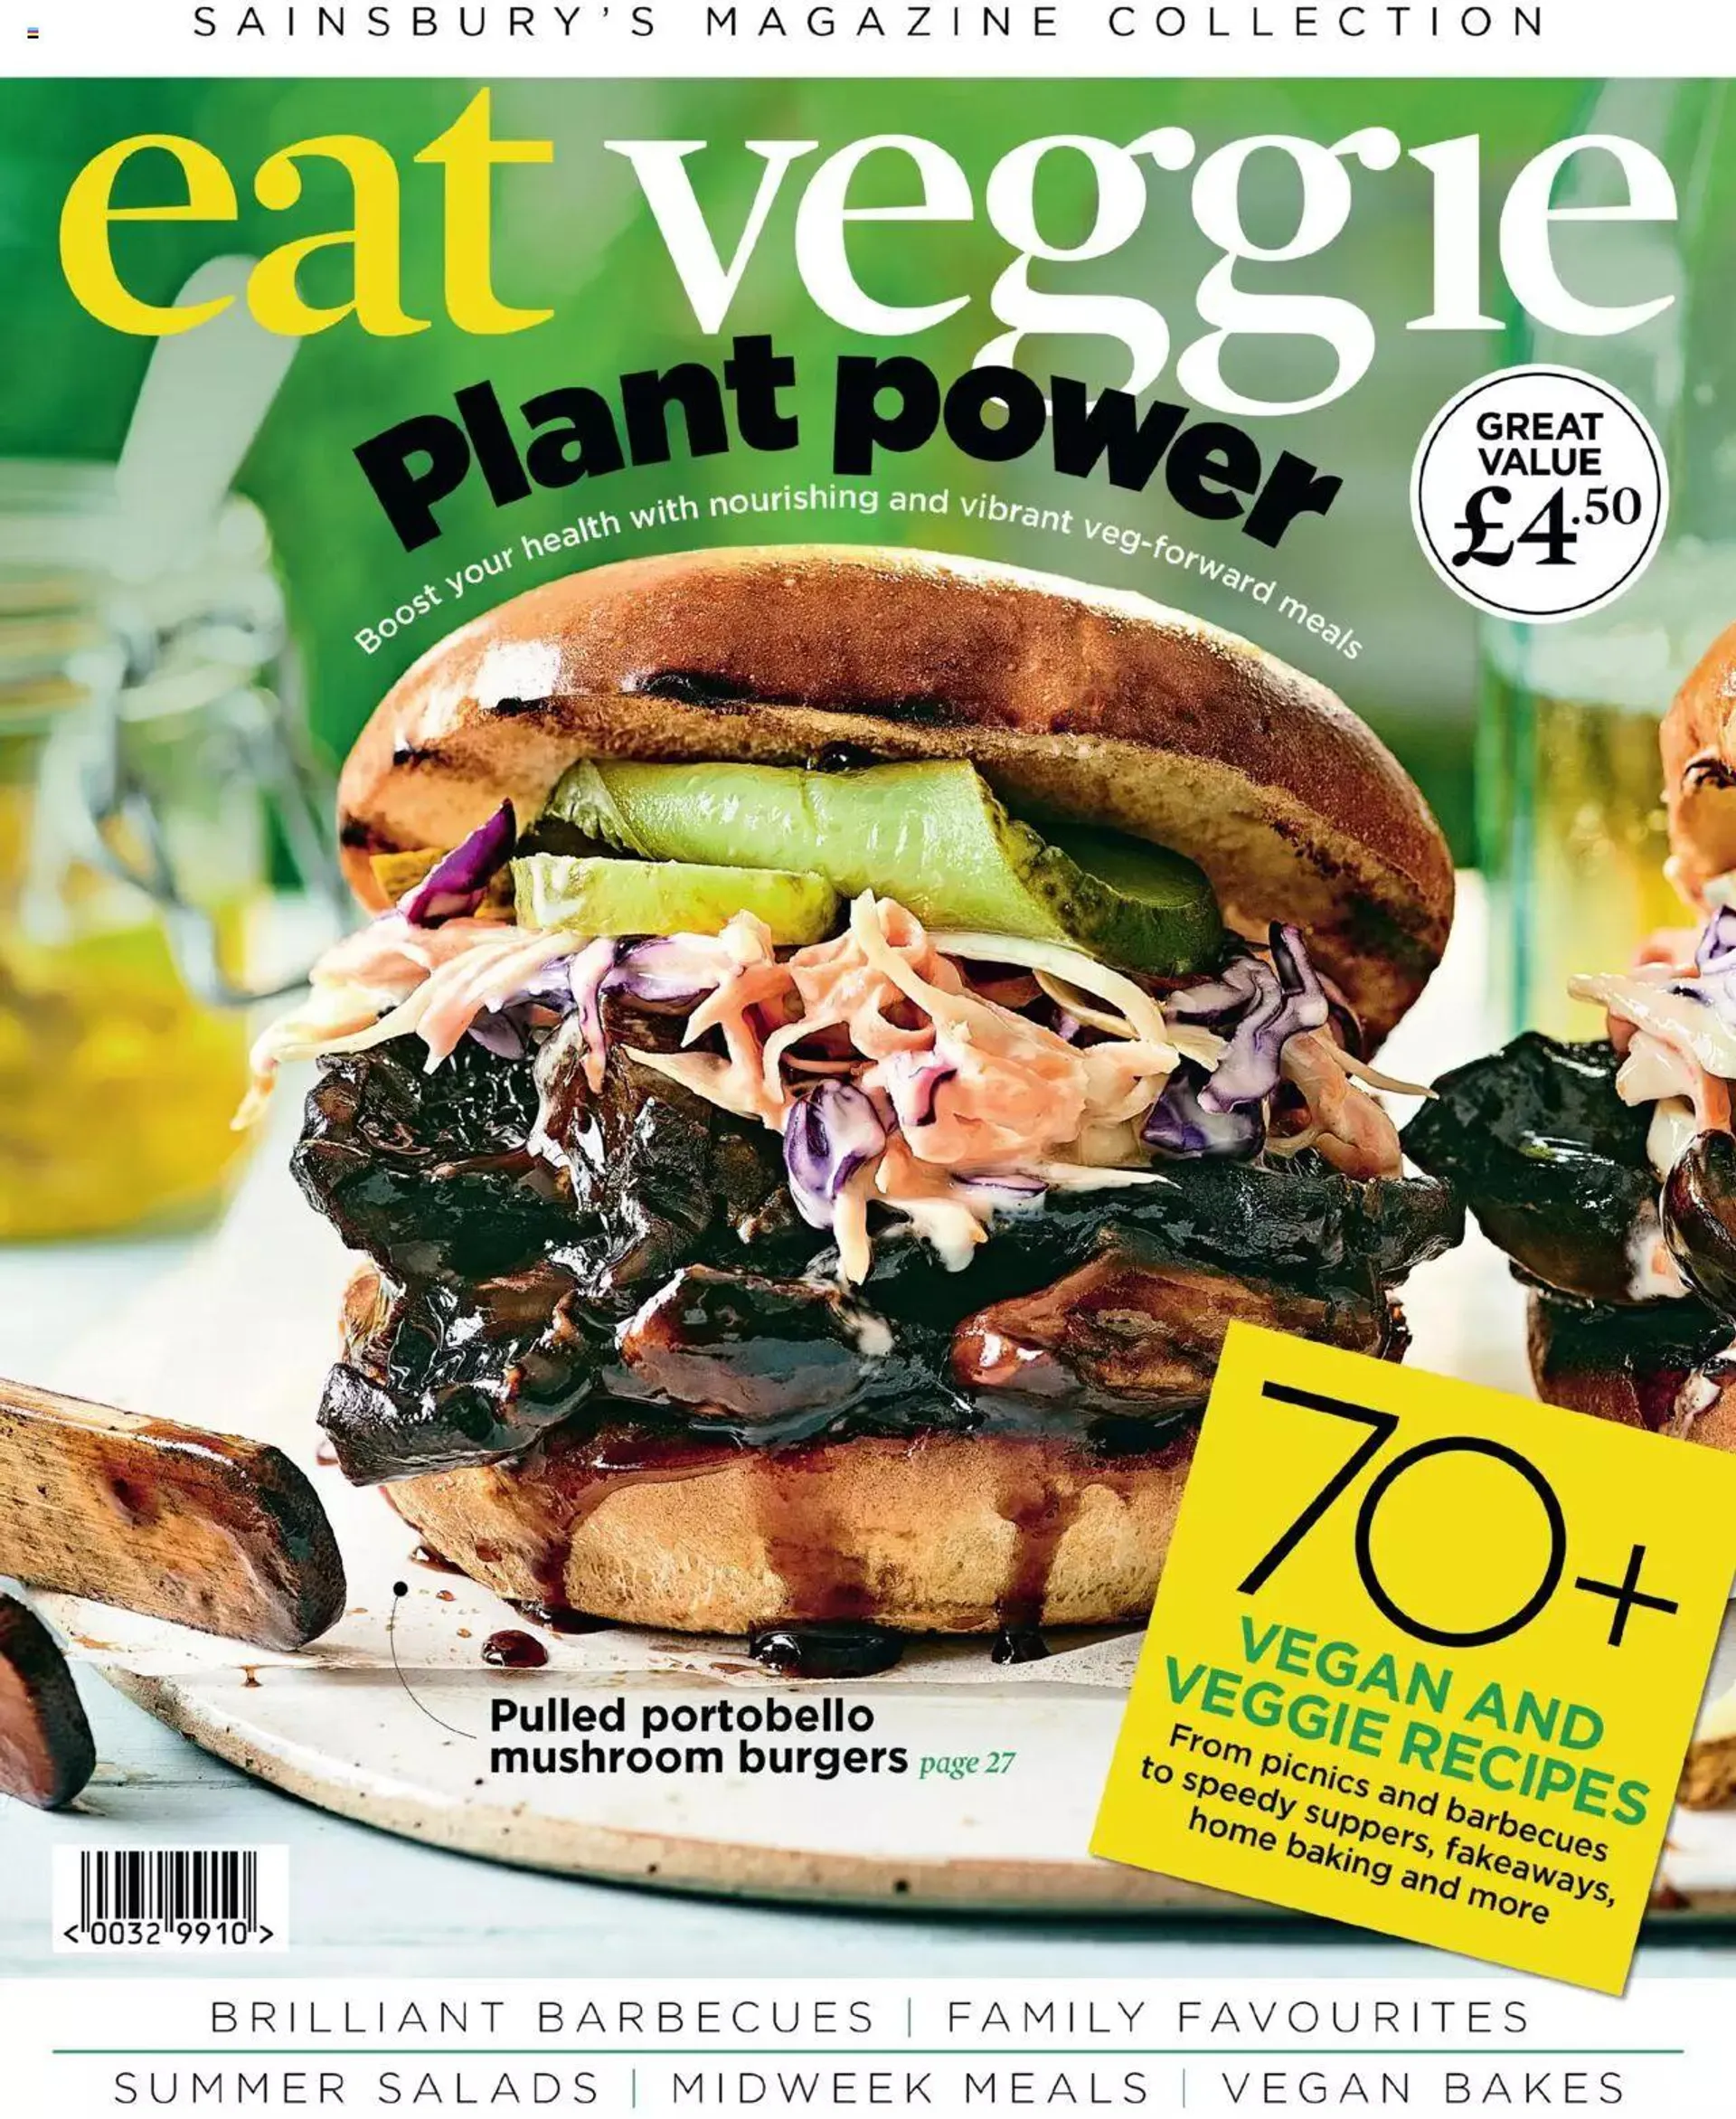 Sainsbury's - Magazine Collection - Eat Veggie Plant Power 2024 from 1 March to 31 December 2024 - Catalogue Page 